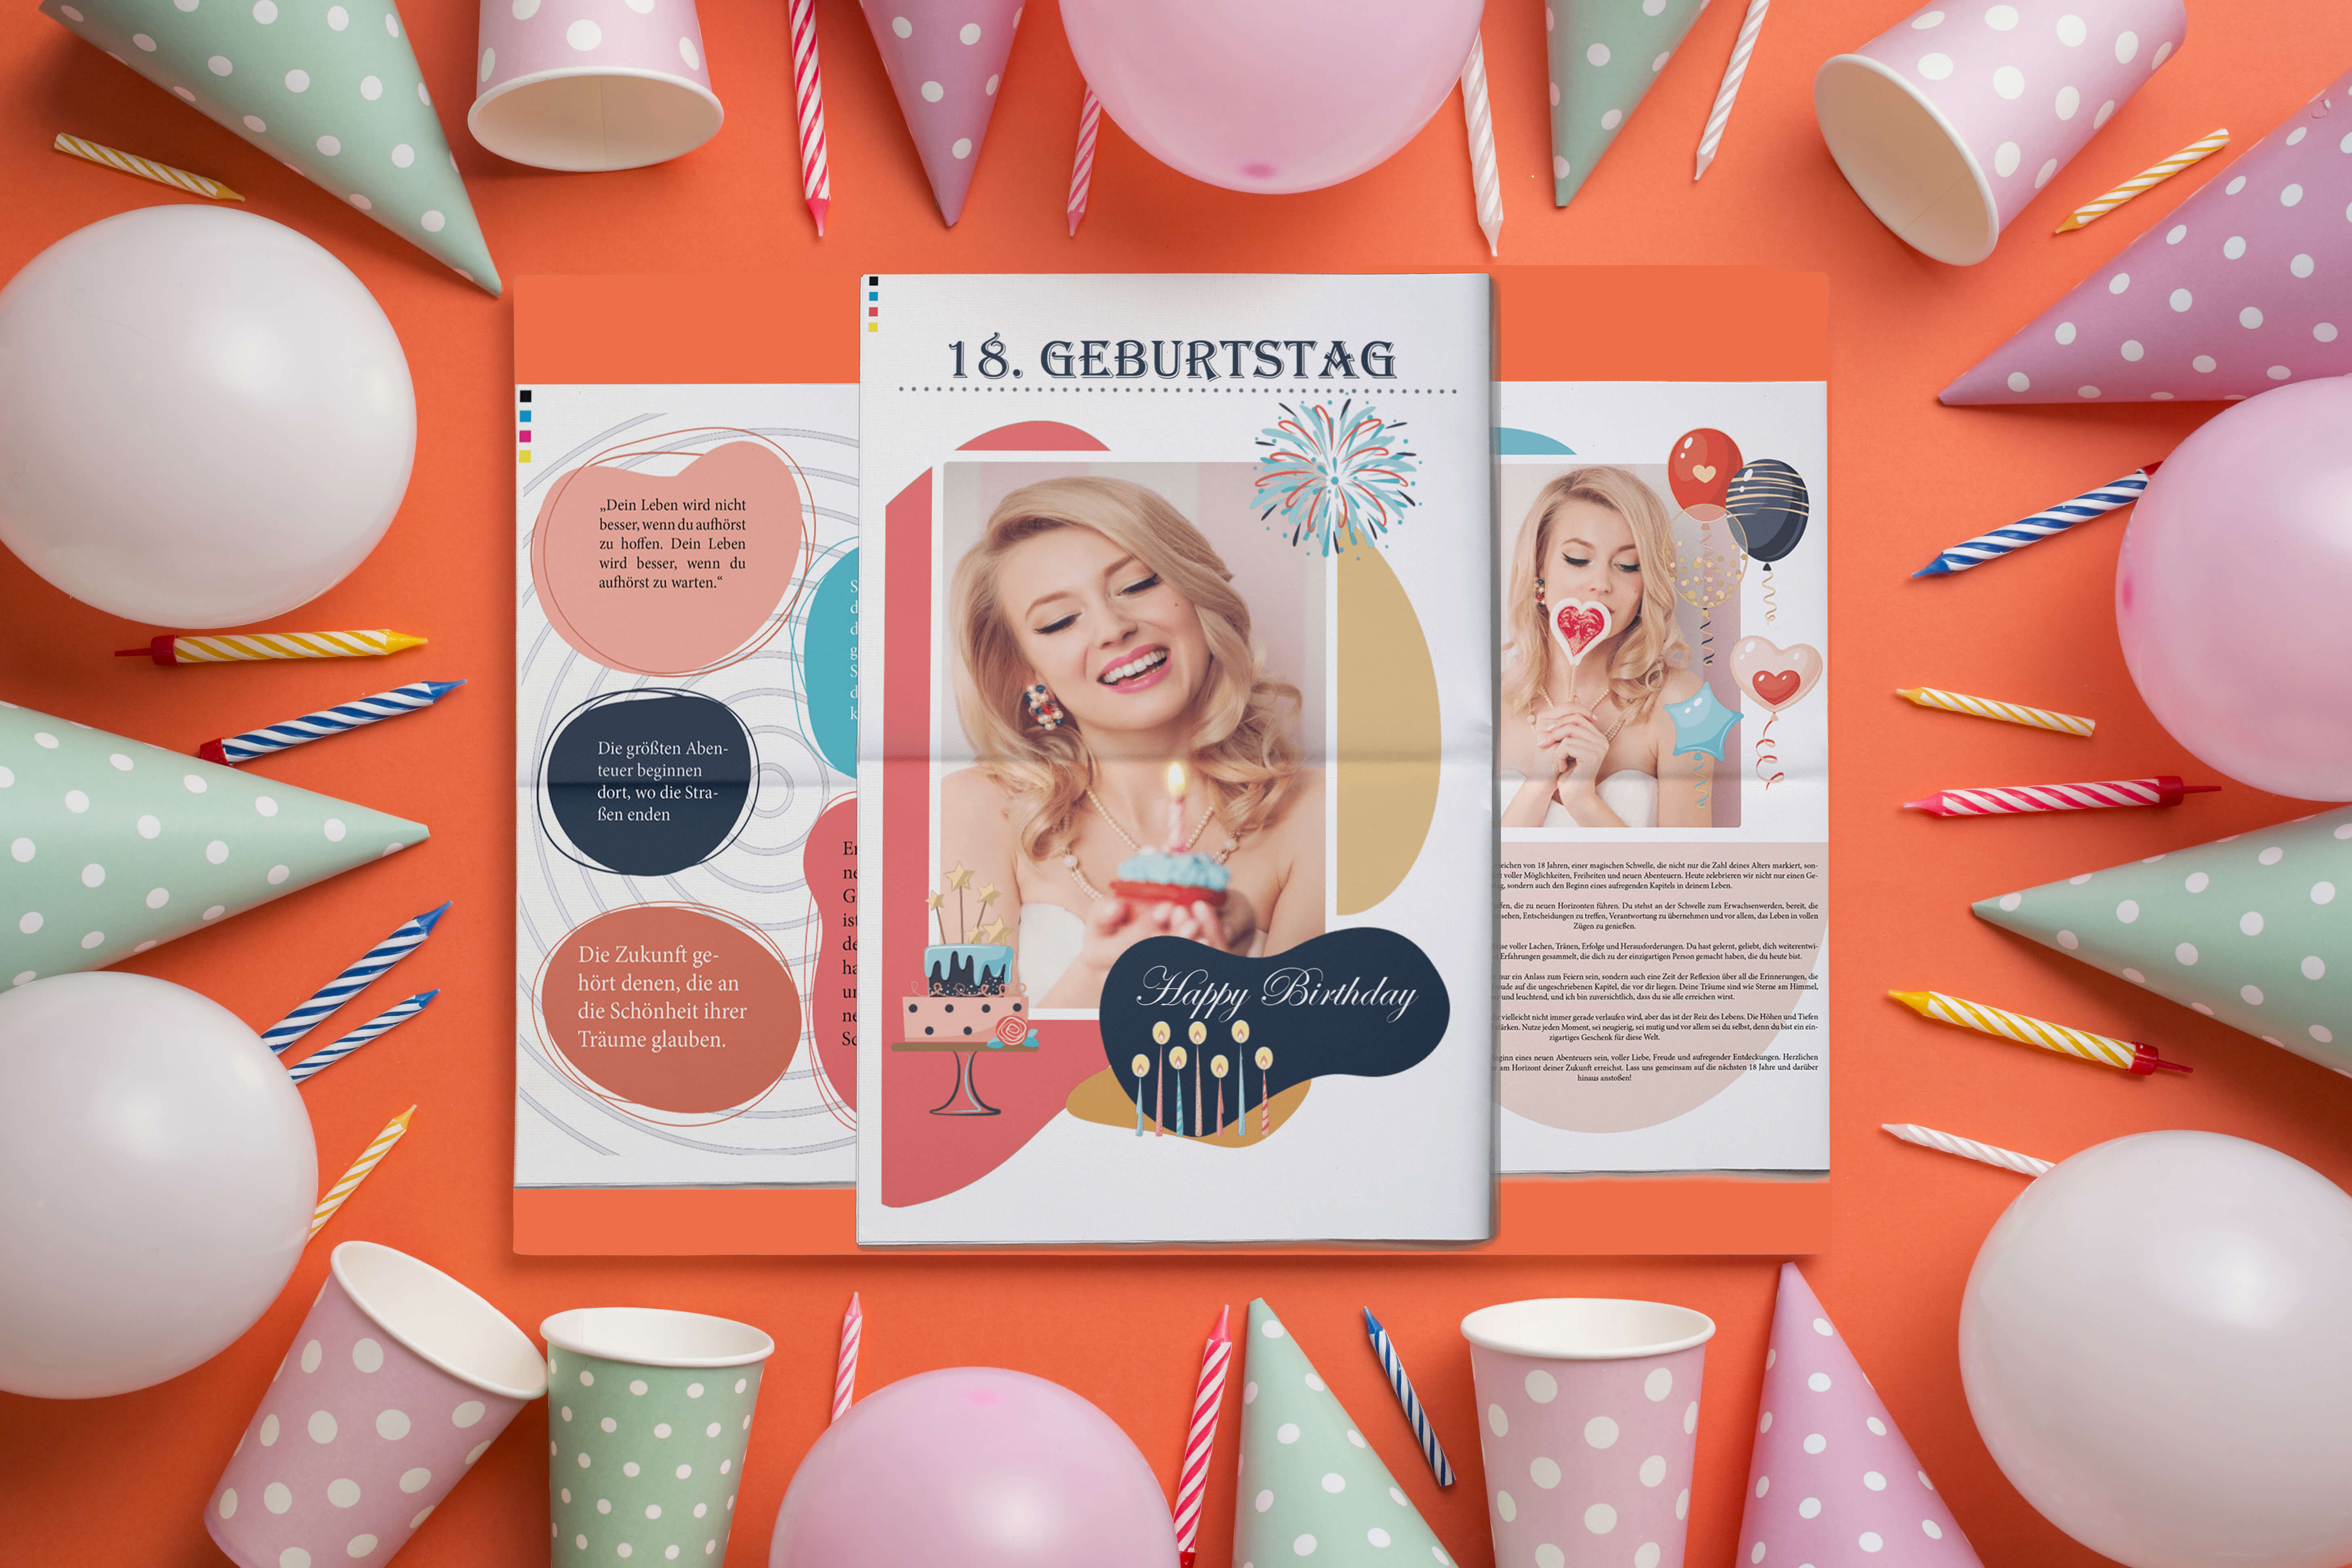 Wedding newspaper with 18th birthday template to design online and print